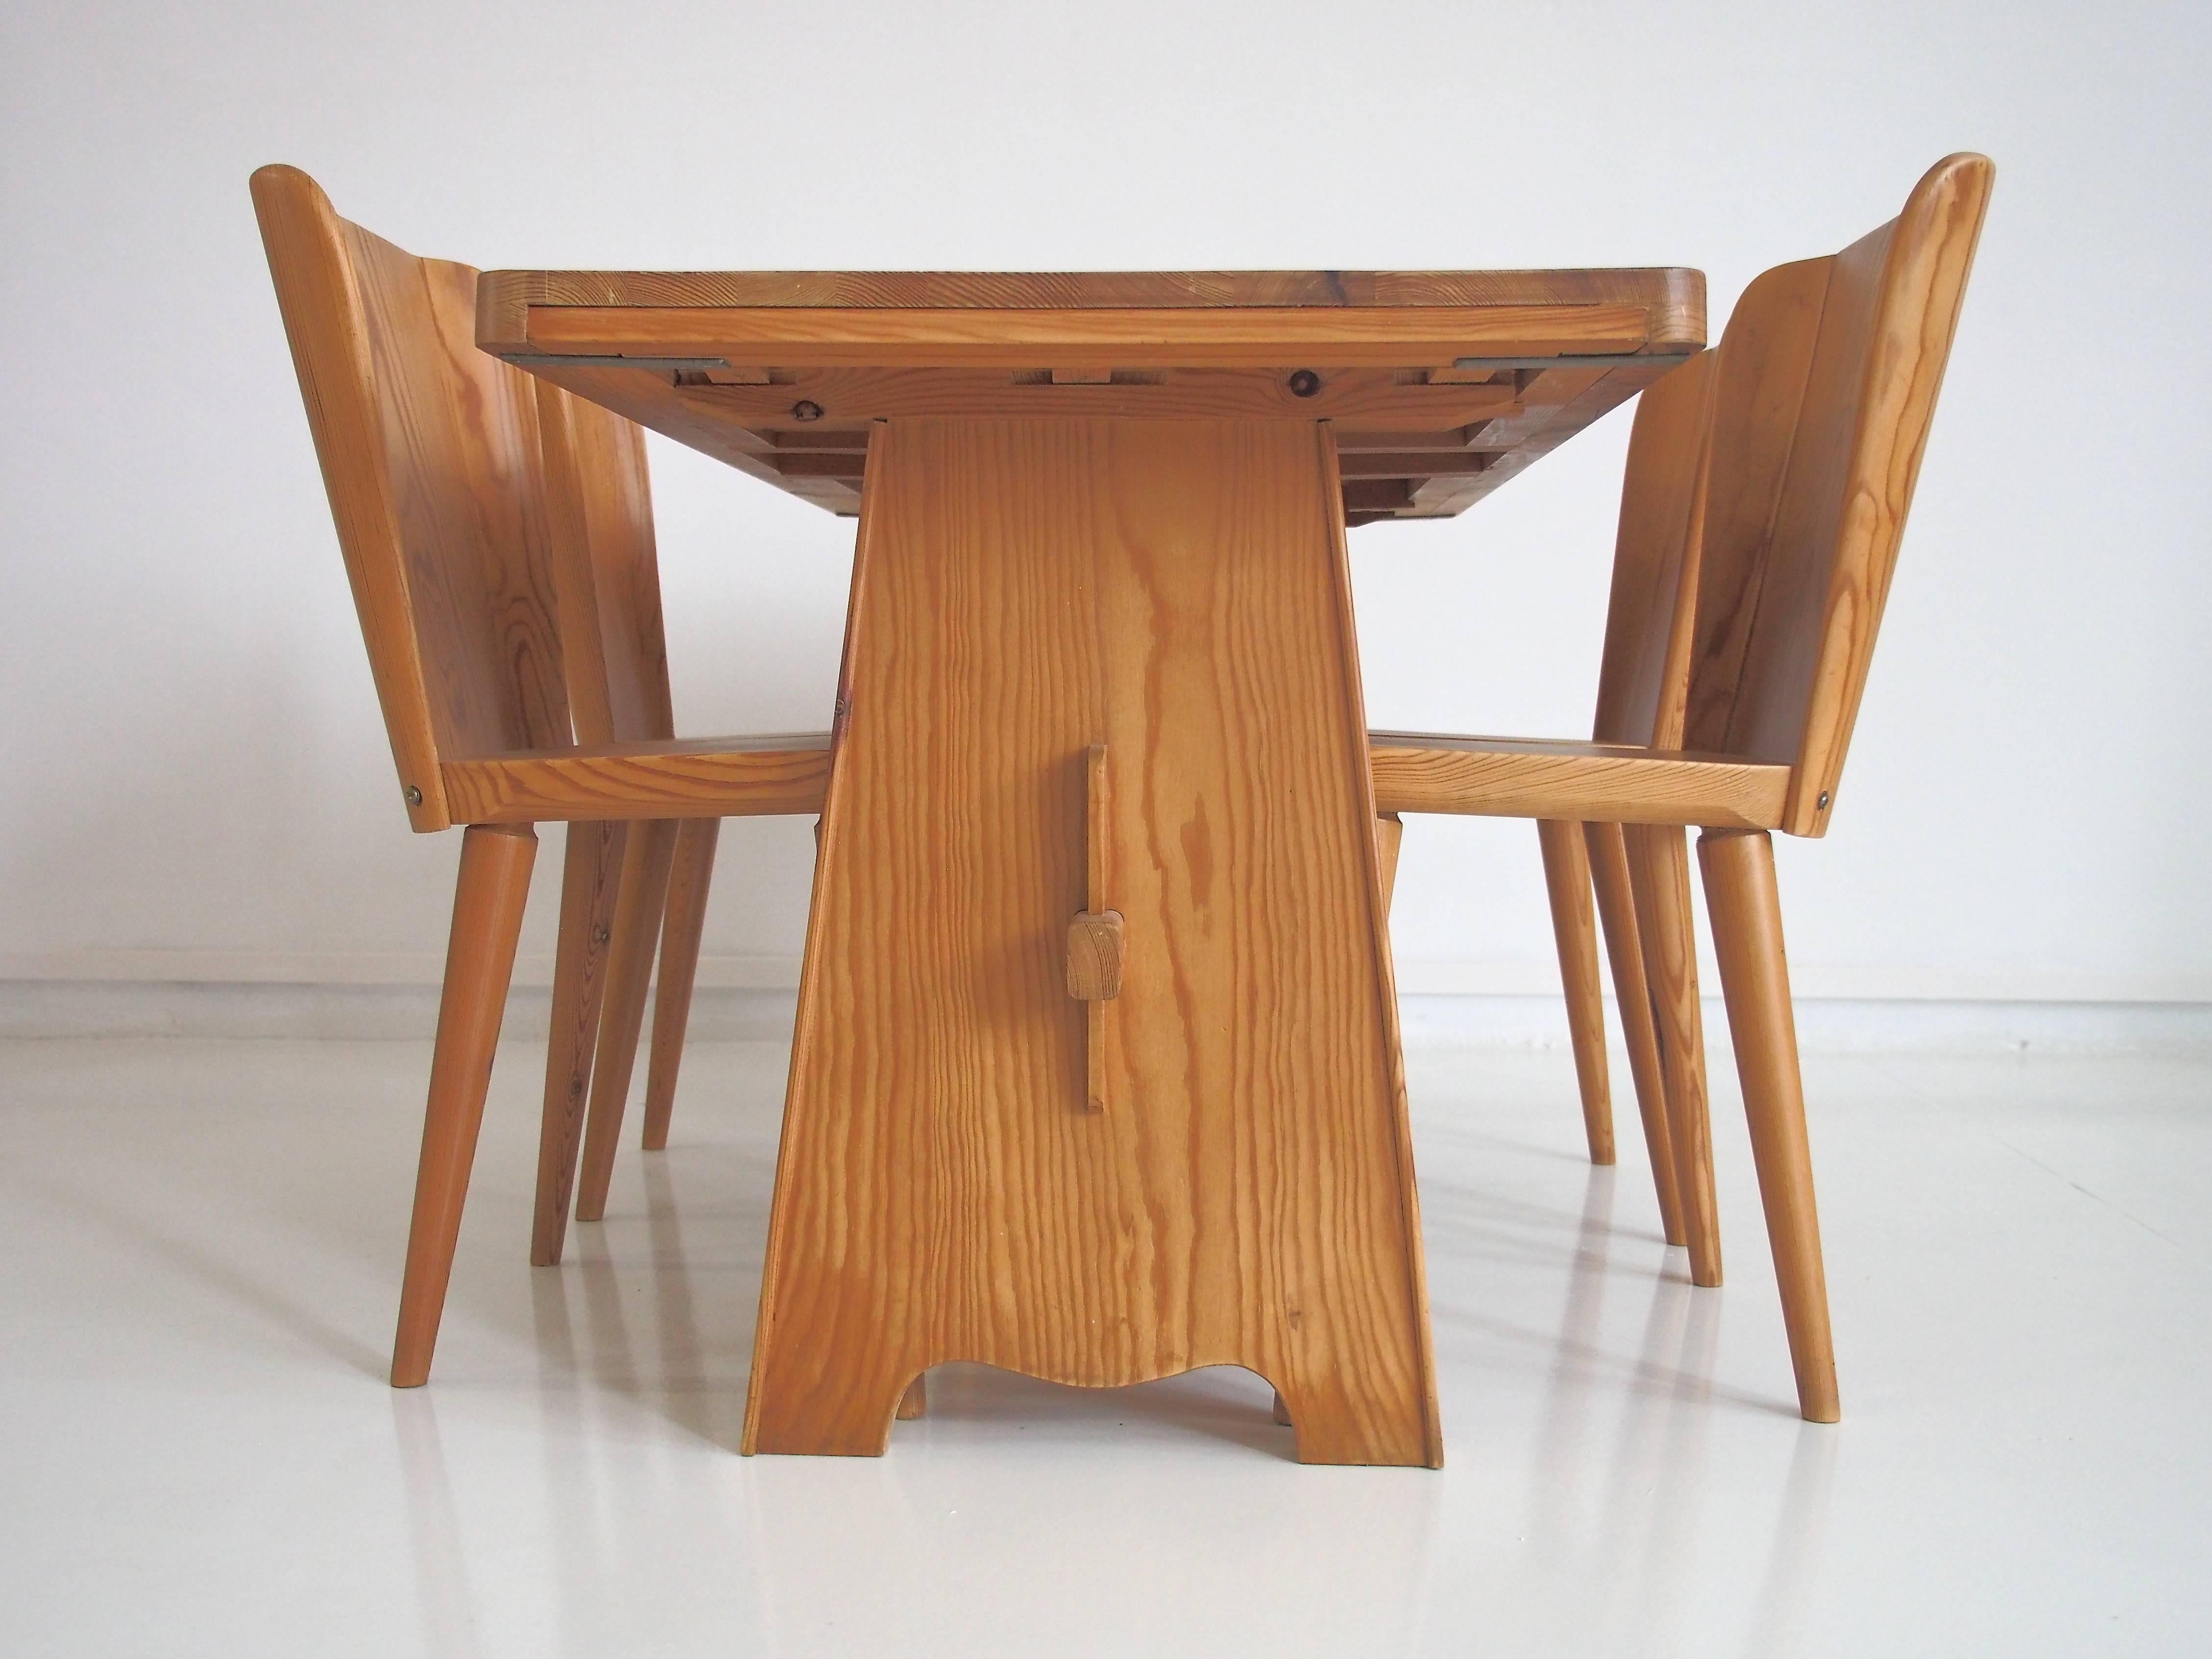 Set of dining table with four chairs made of pine, model 510, designed by Göran Malmvall and produced by Karl Andersson & Söner in Sweden during the 1940s. Seats with thermoformed back. Recently restored, very good condition.
Dimensions: Table -